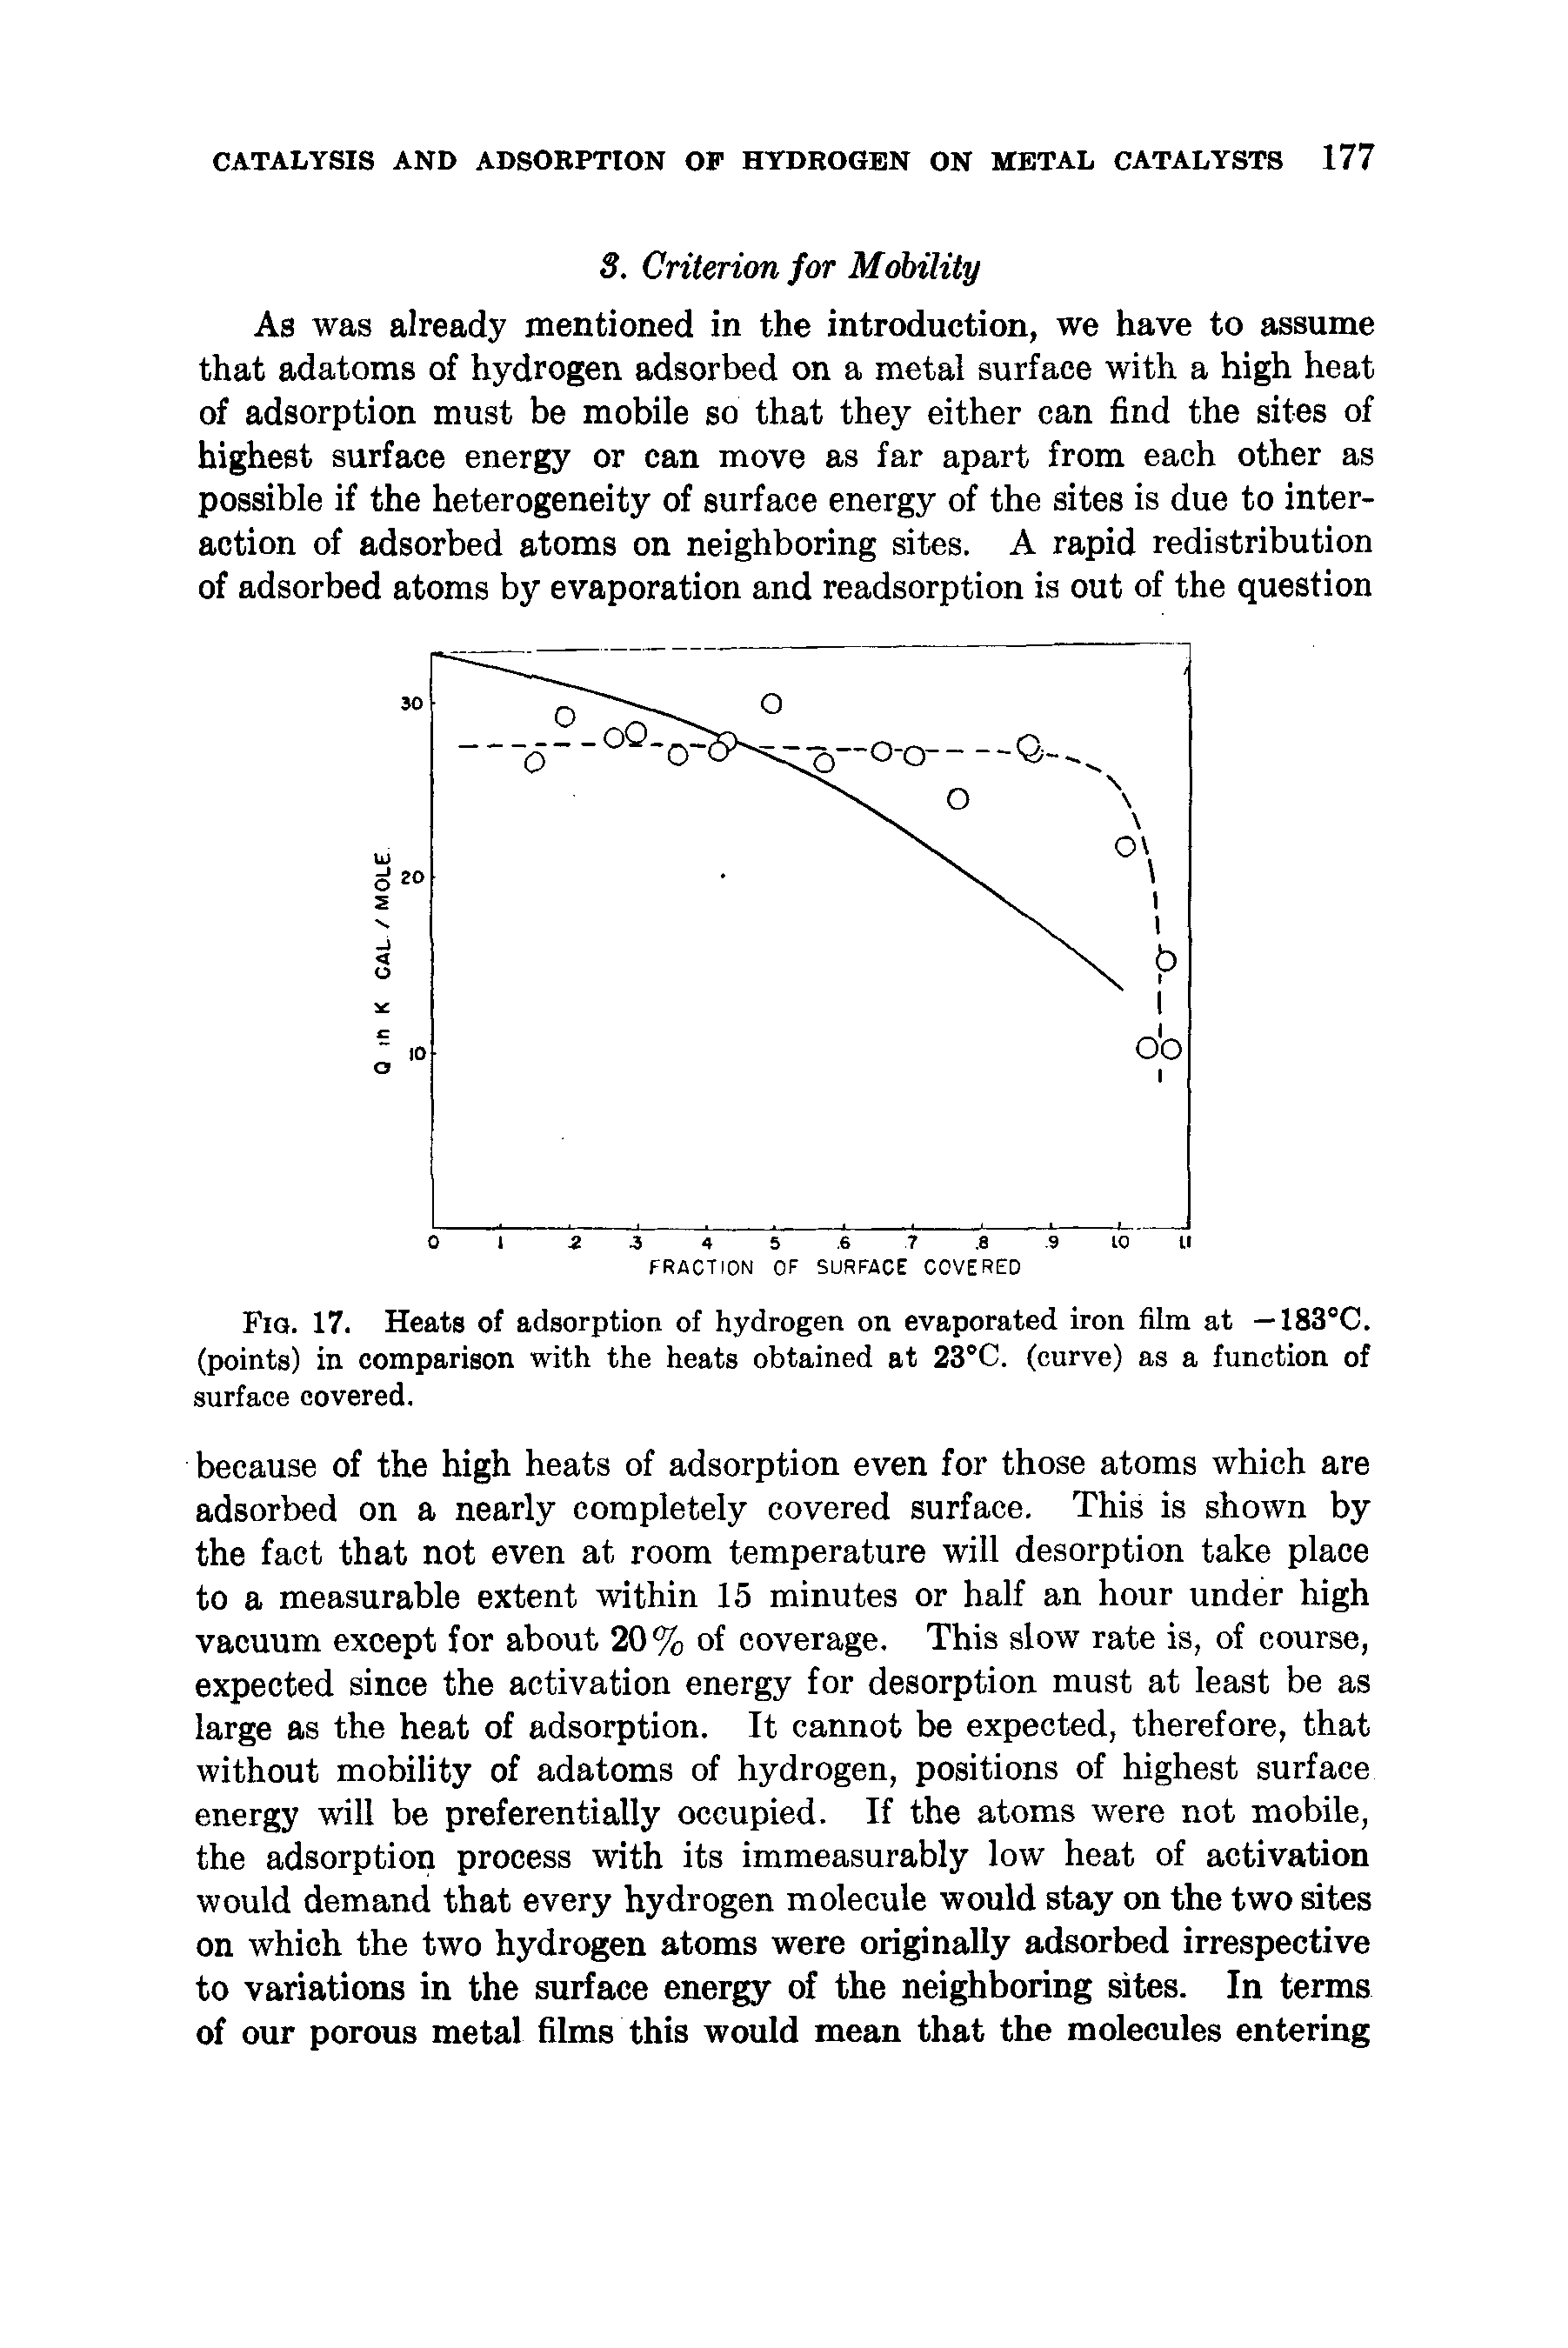 Fig. 17. Heats of adsorption of hydrogen on evaporated iron film at — 183°C. (points) in comparison with the heats obtained at 23°C. (curve) as a function of surface covered.